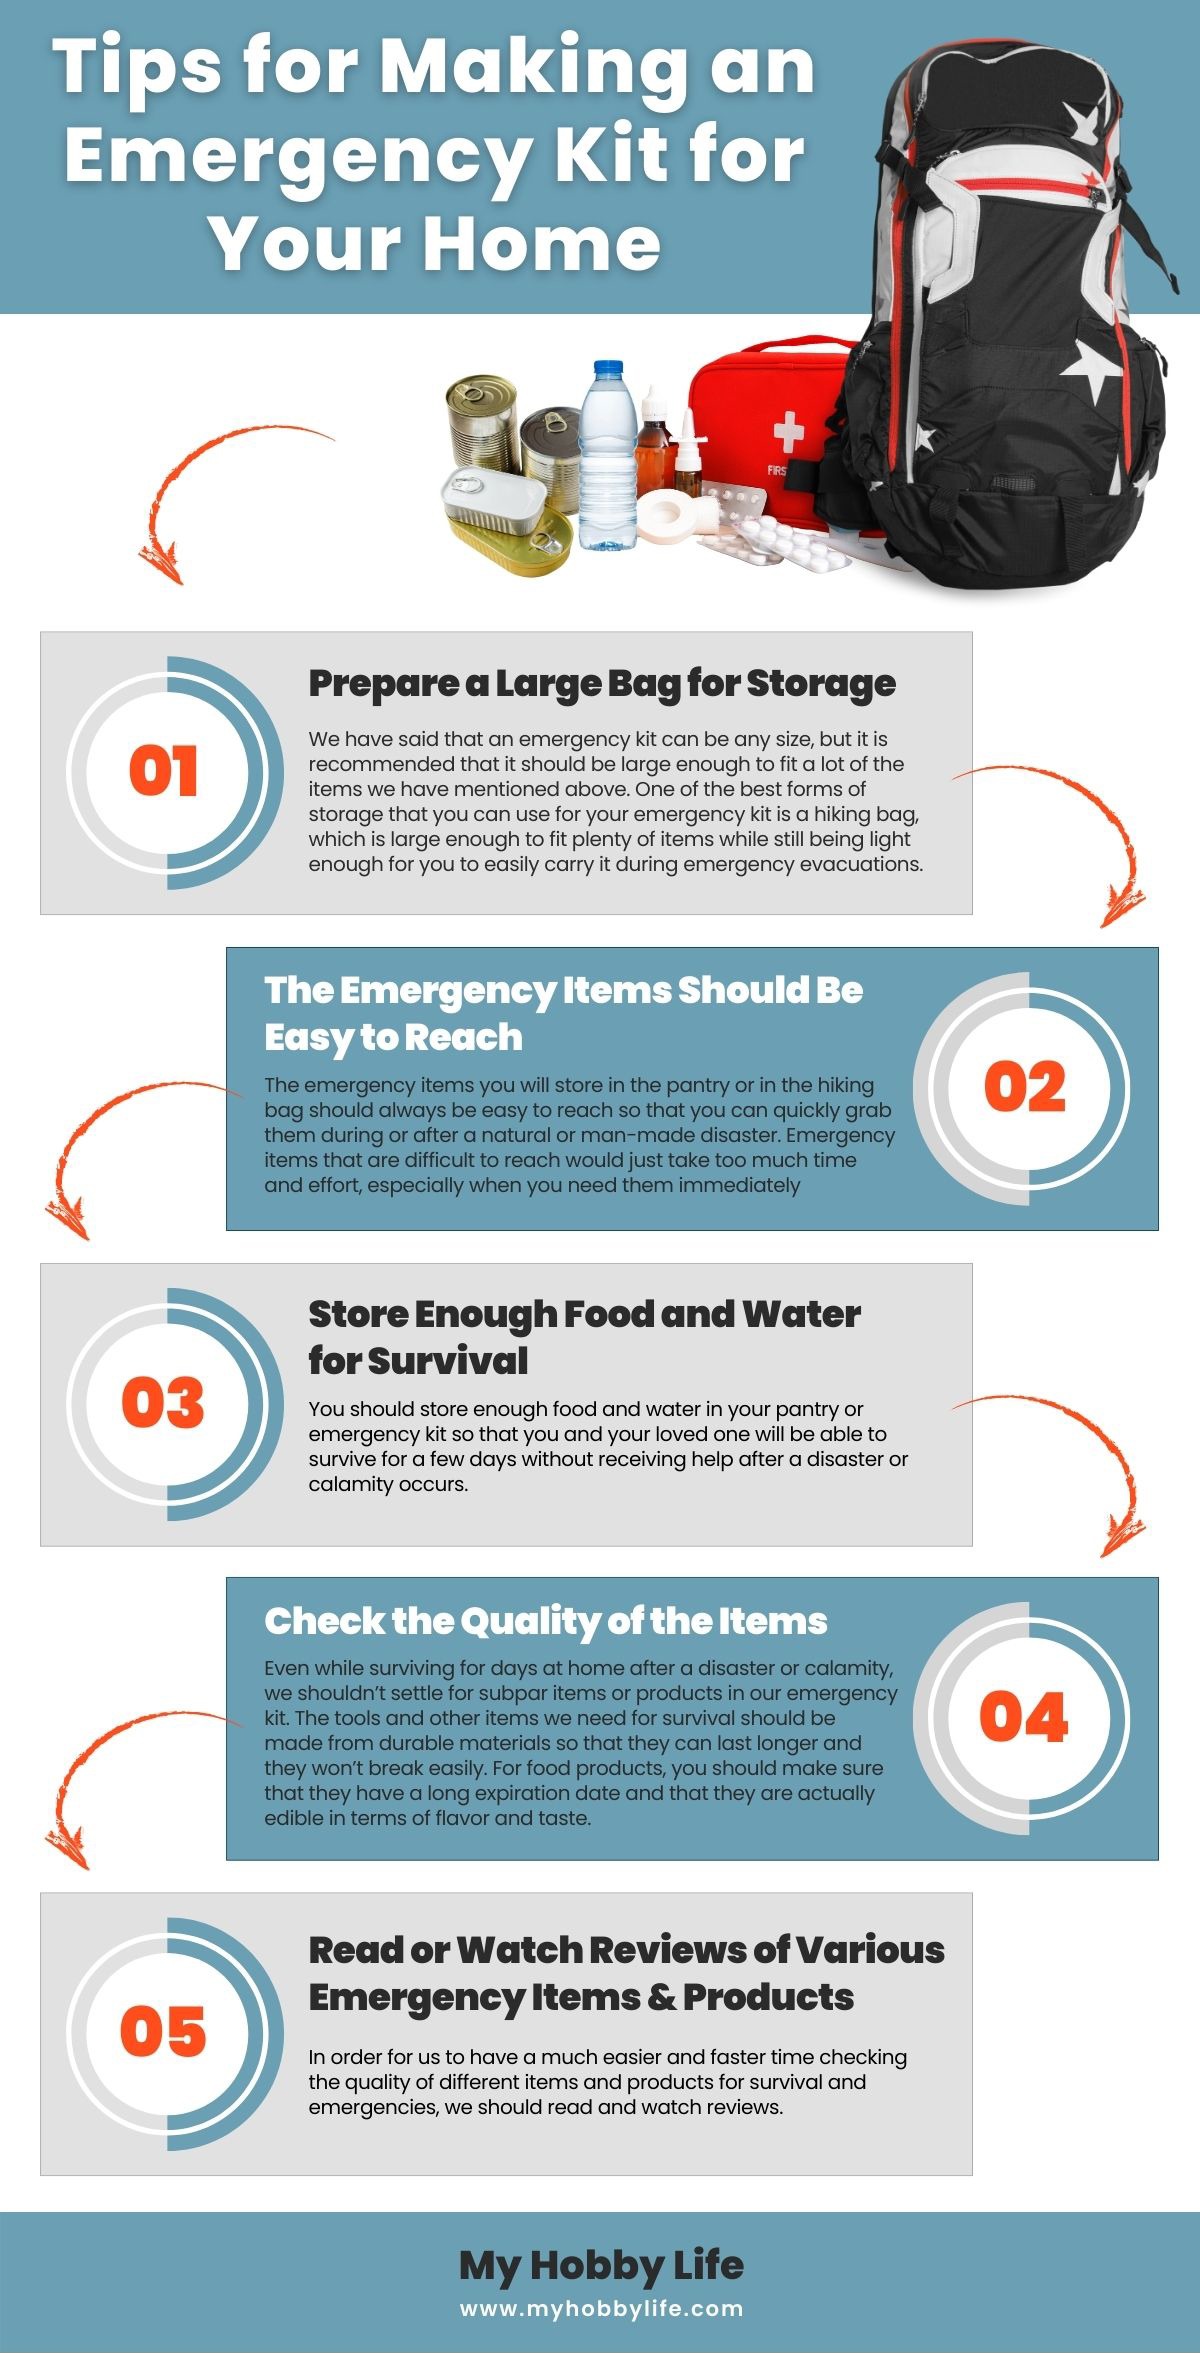 Tips for Making an Emergency Kit for Your Home